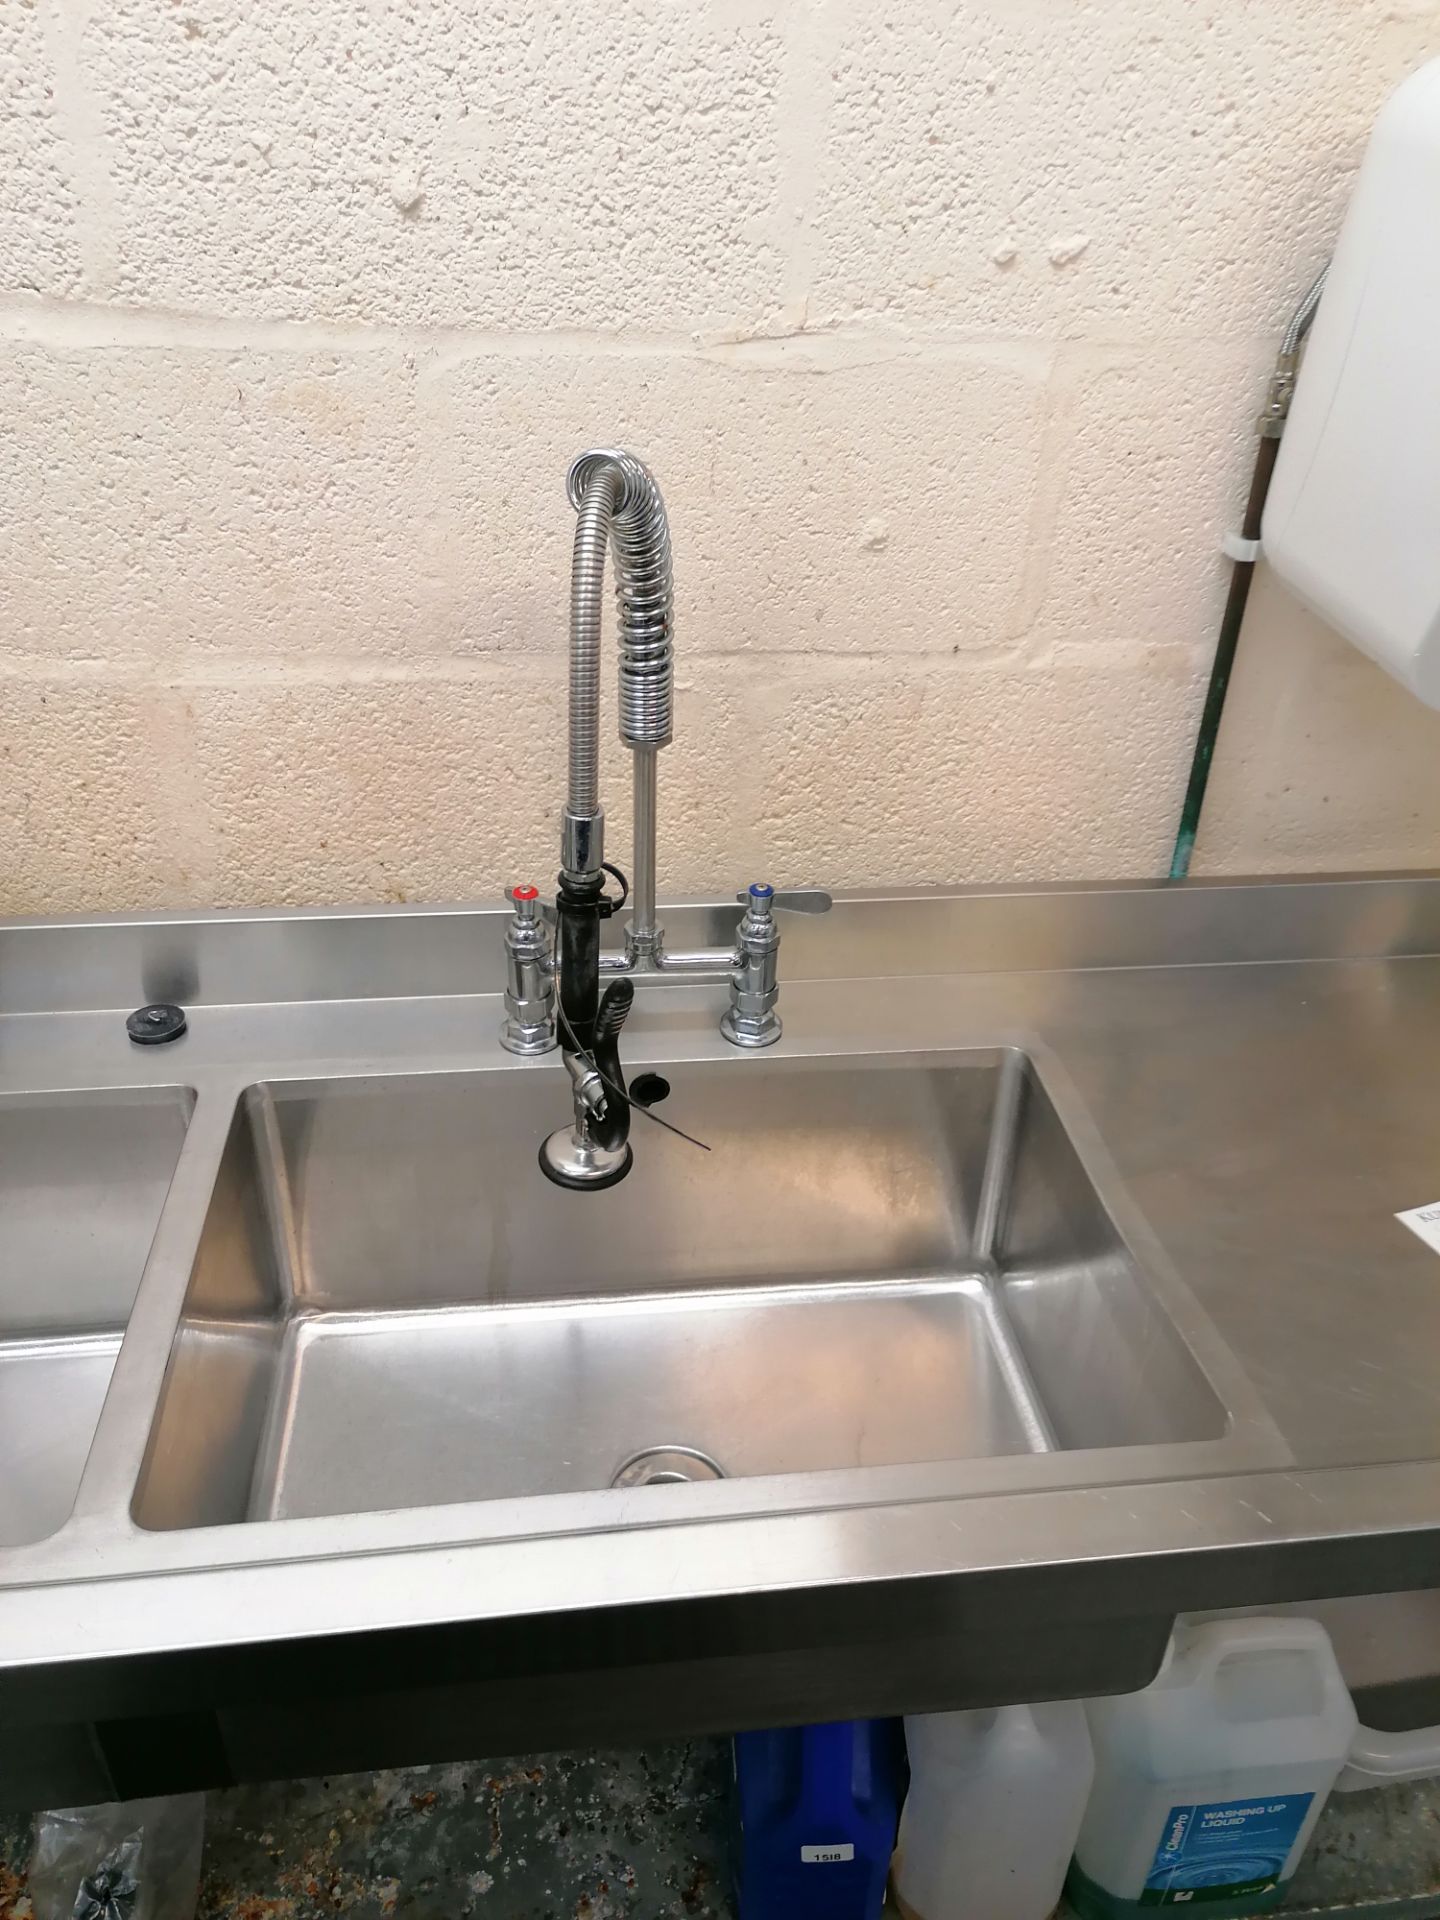 Vouge S/S twin drainer sink - Image 4 of 5